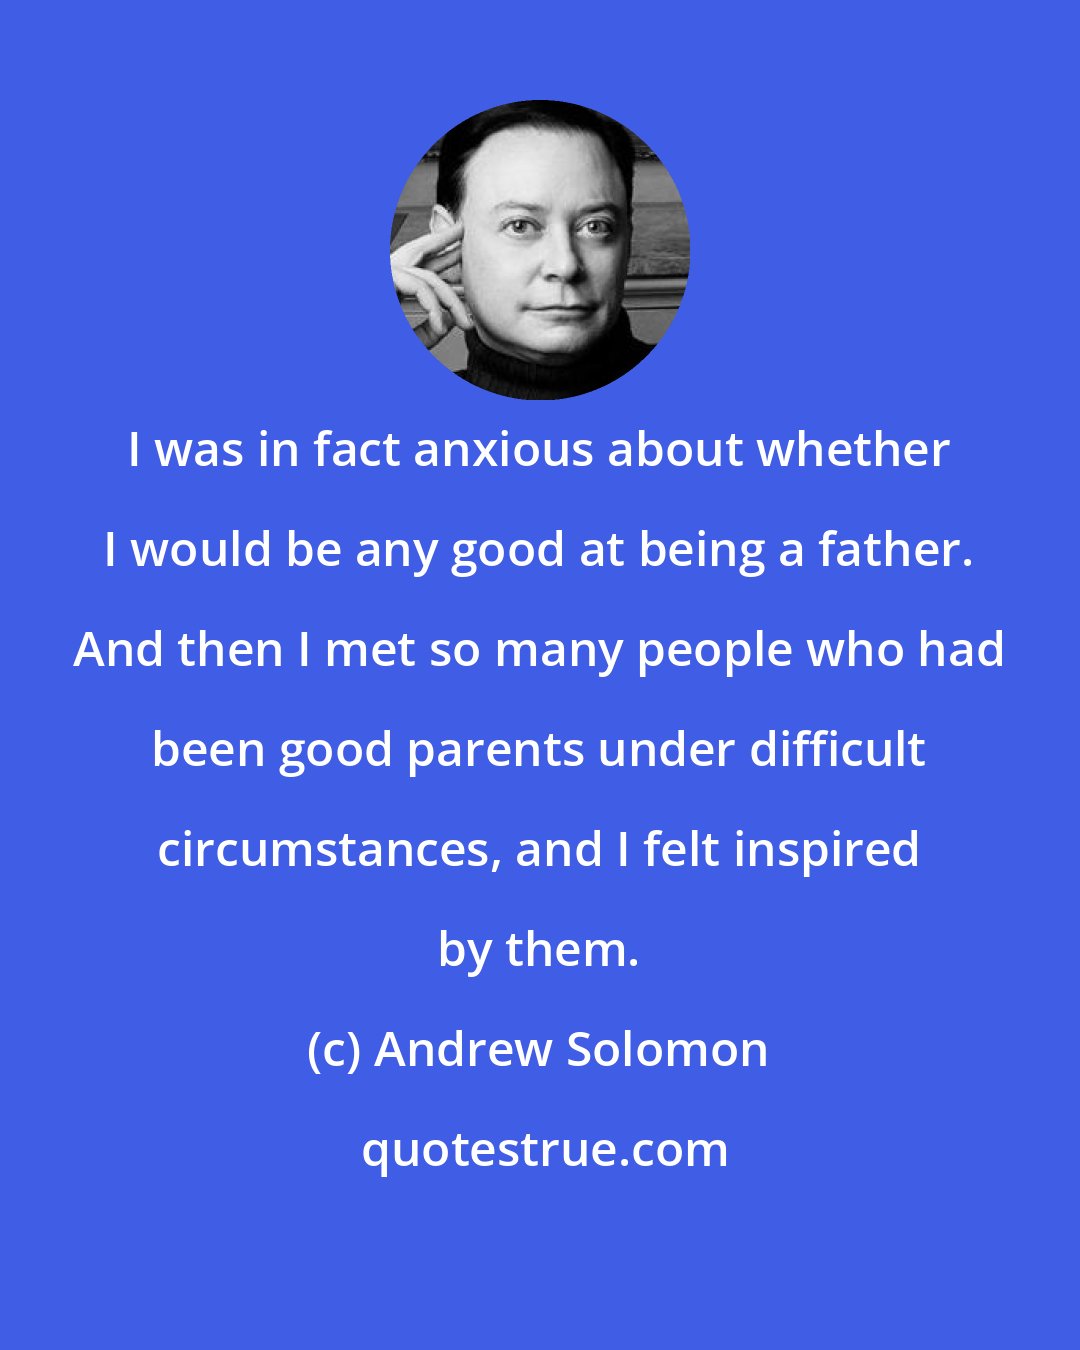 Andrew Solomon: I was in fact anxious about whether I would be any good at being a father. And then I met so many people who had been good parents under difficult circumstances, and I felt inspired by them.